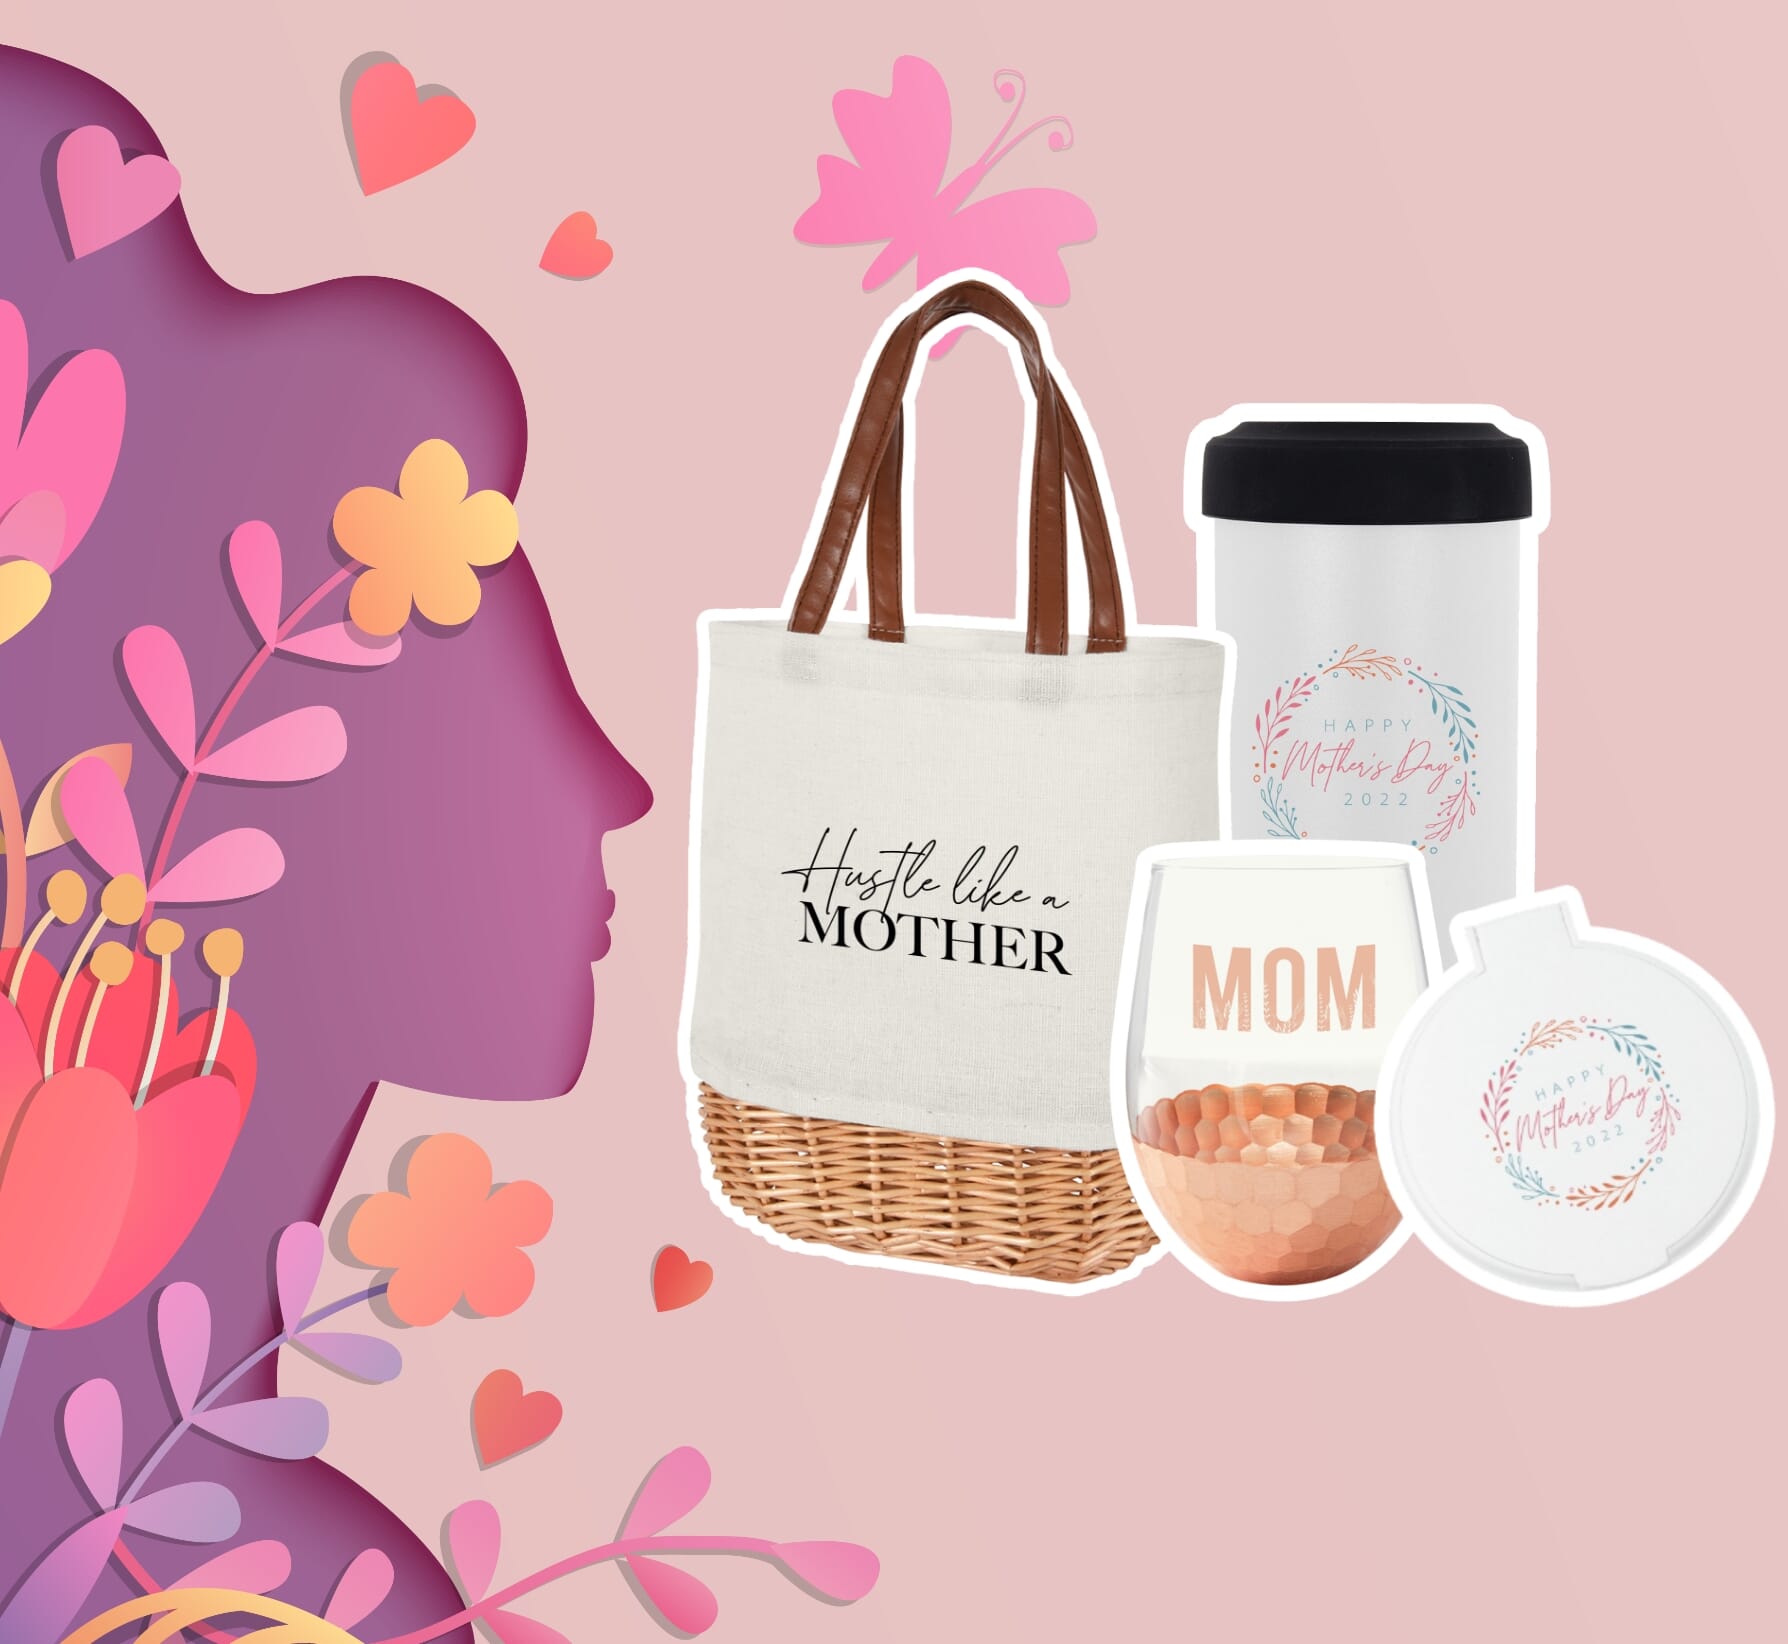 Custom mothers day gift ideas